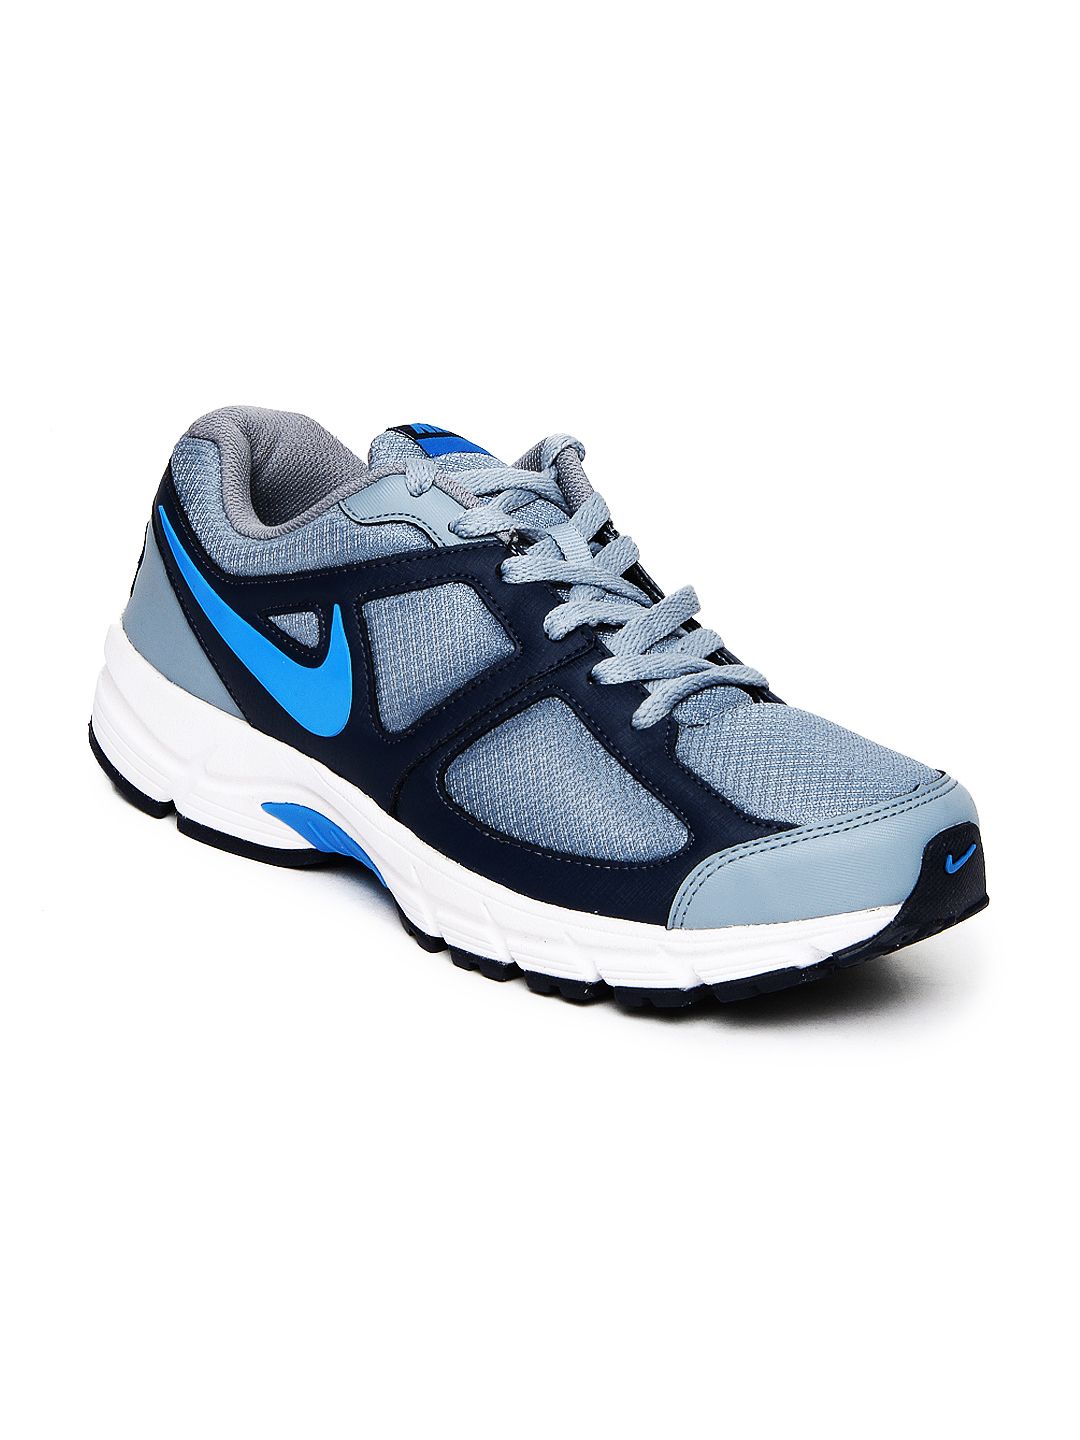 nike shoes online india